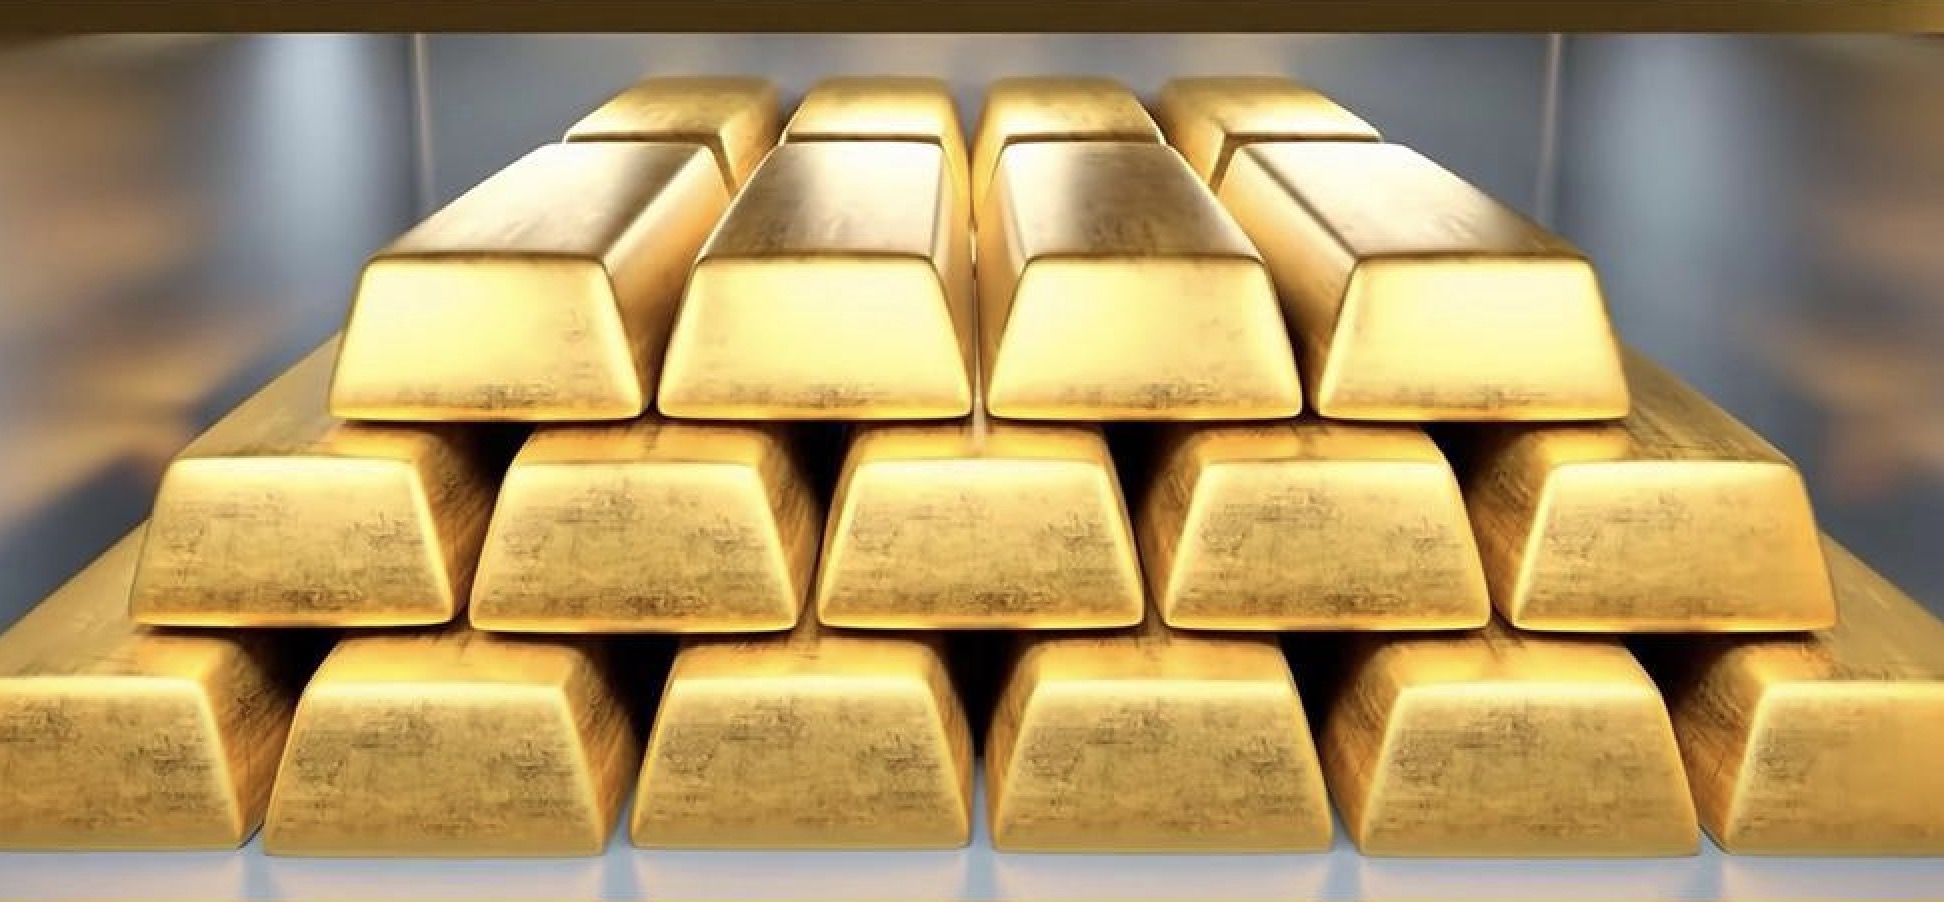 Everbright Futures: Gold prices may fluctuate in the short term, pay attention to the implementation of core PCE